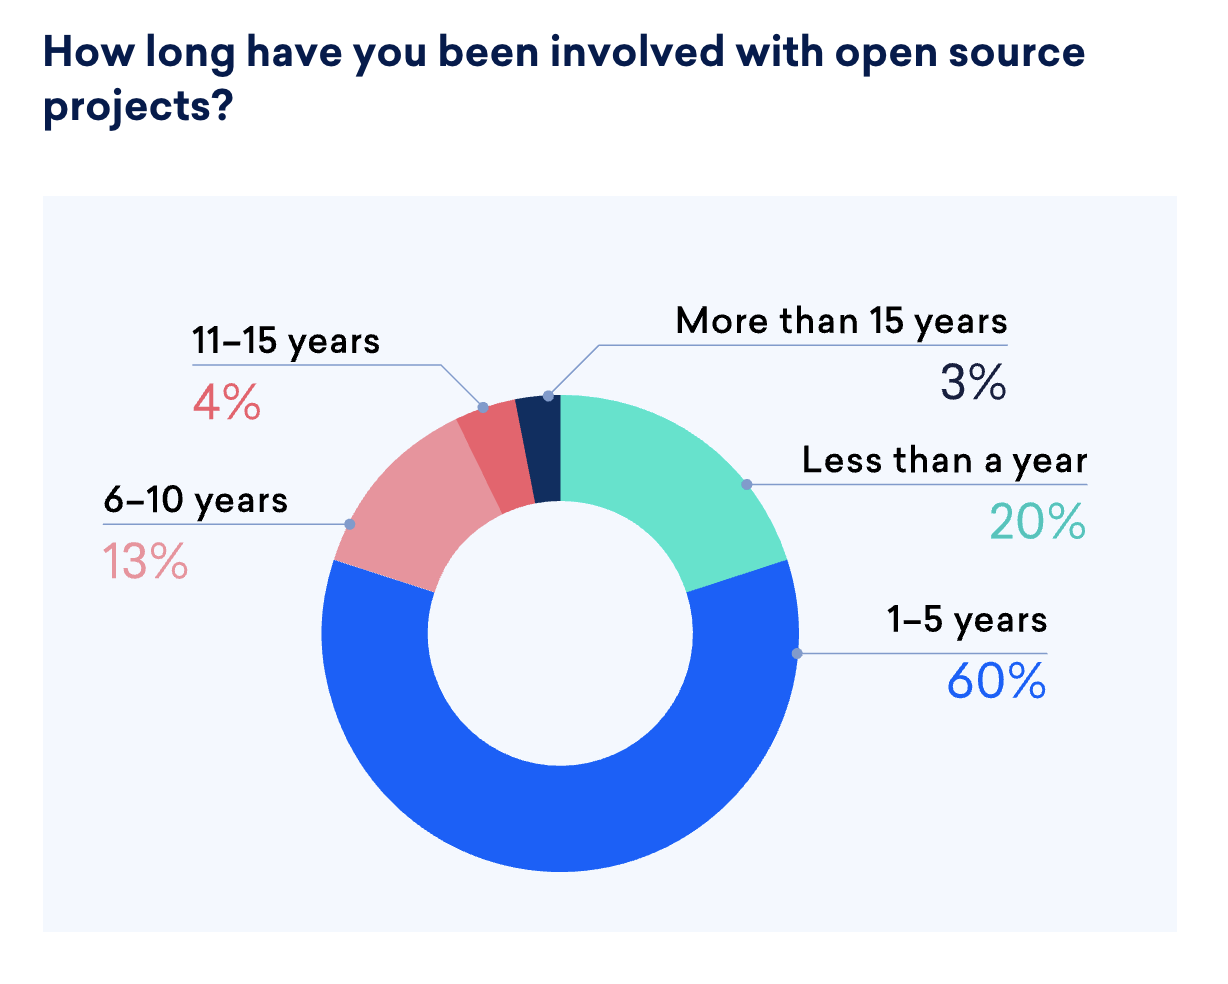 open-source-projects-involvement.png